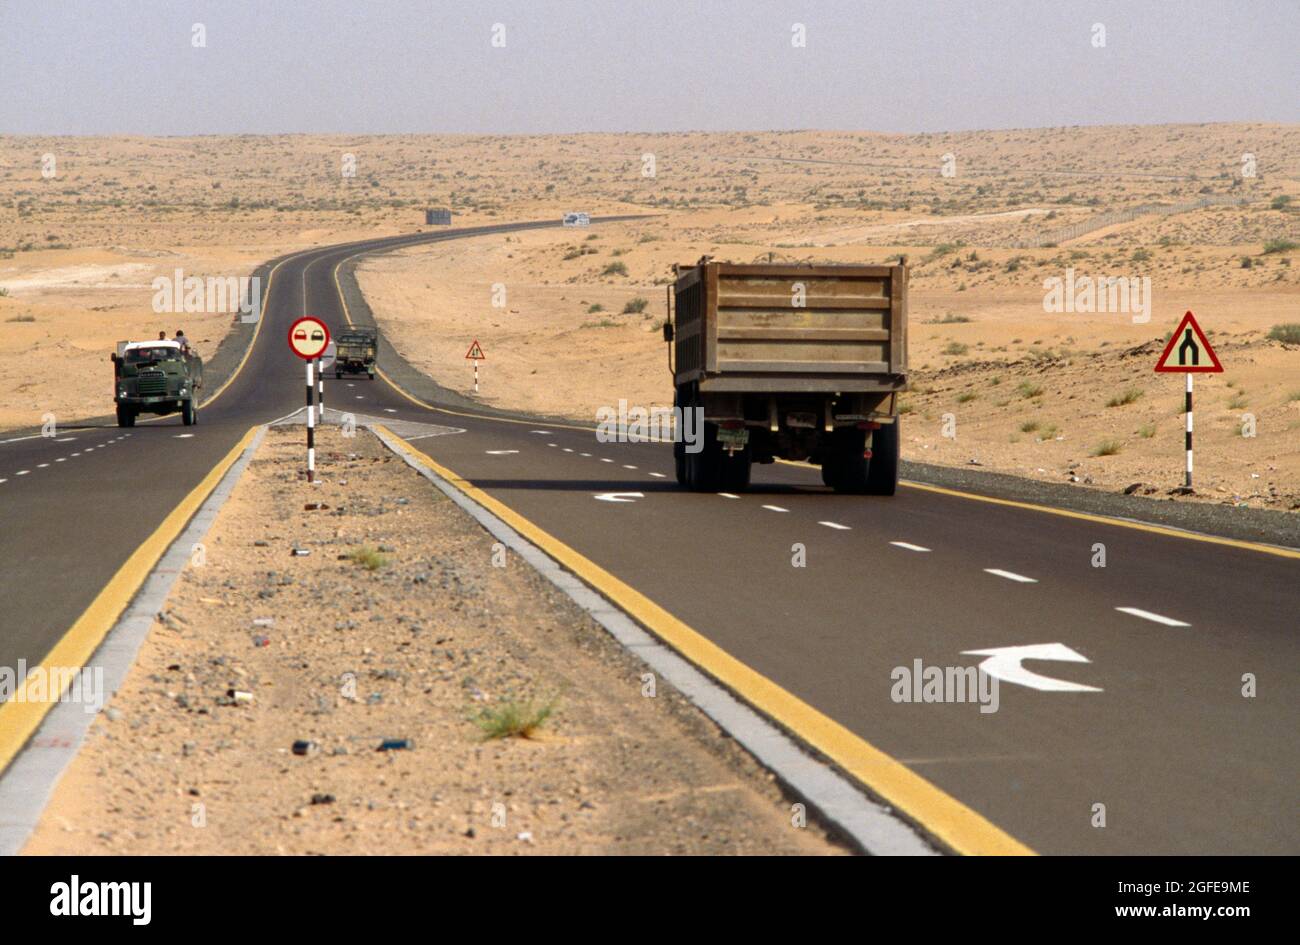 Dubai UAE Rubbish On The Side Of The Road In The Desert Stock Photo